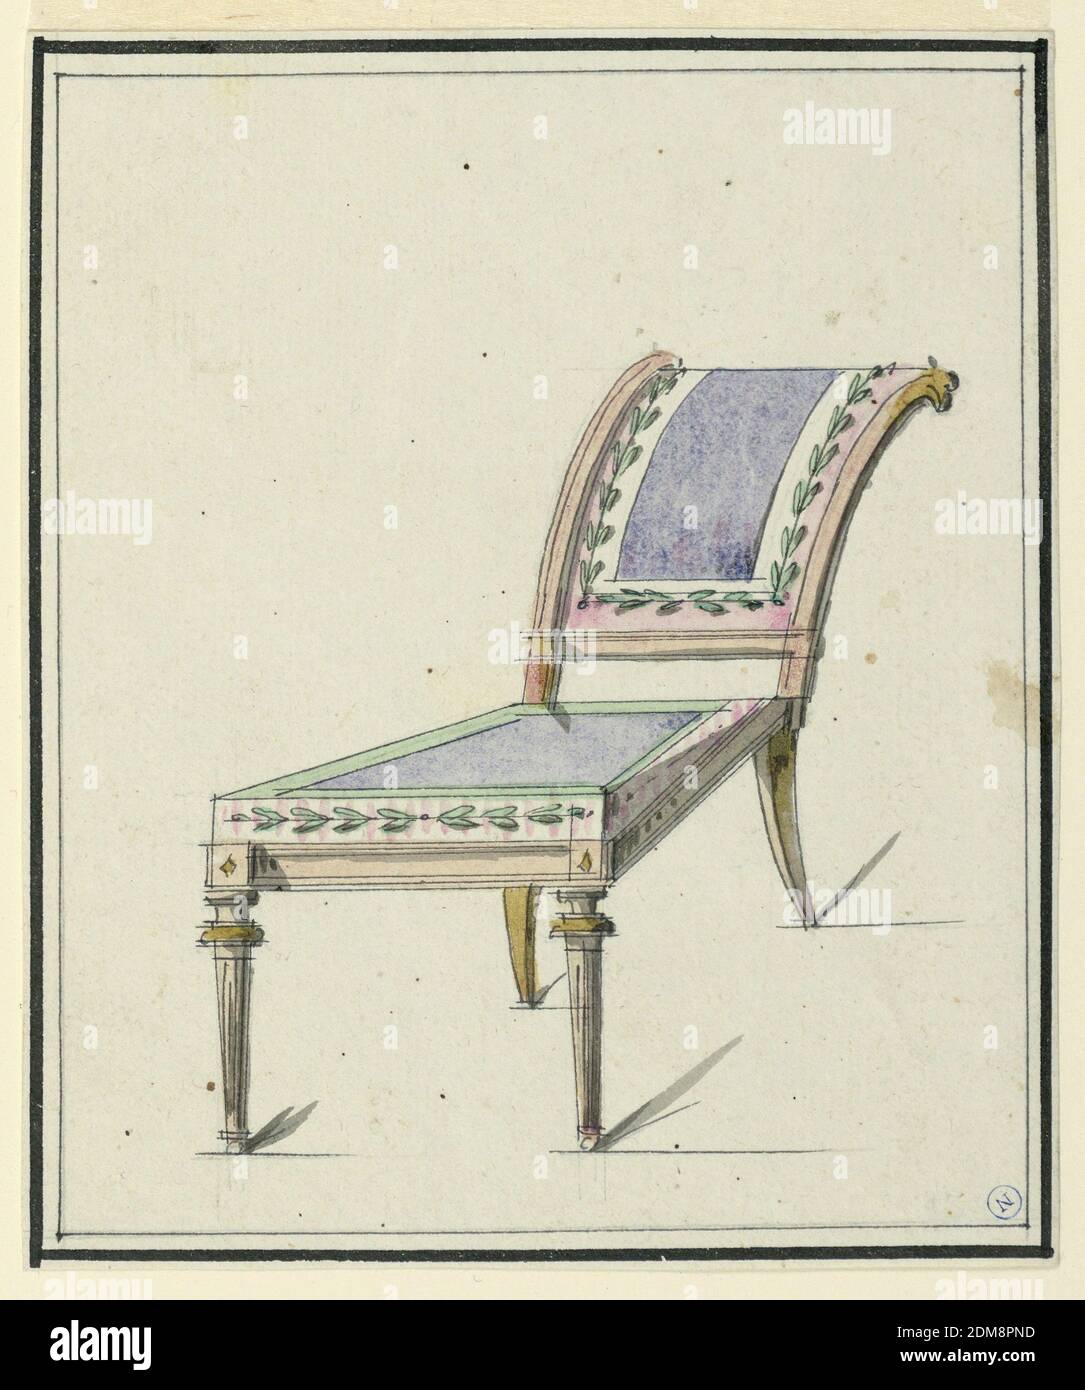 Design for a Chair, Brush and watercolor, grey wash, pen and black ink on white laid paper, Side chair, elongated seat upholstered in purple, bordered with leaf motifs on pink and white stripe. Sloped back, suggesting a reclining chair, upholstered to match the seat., France, 1790, furniture, Drawing Stock Photo